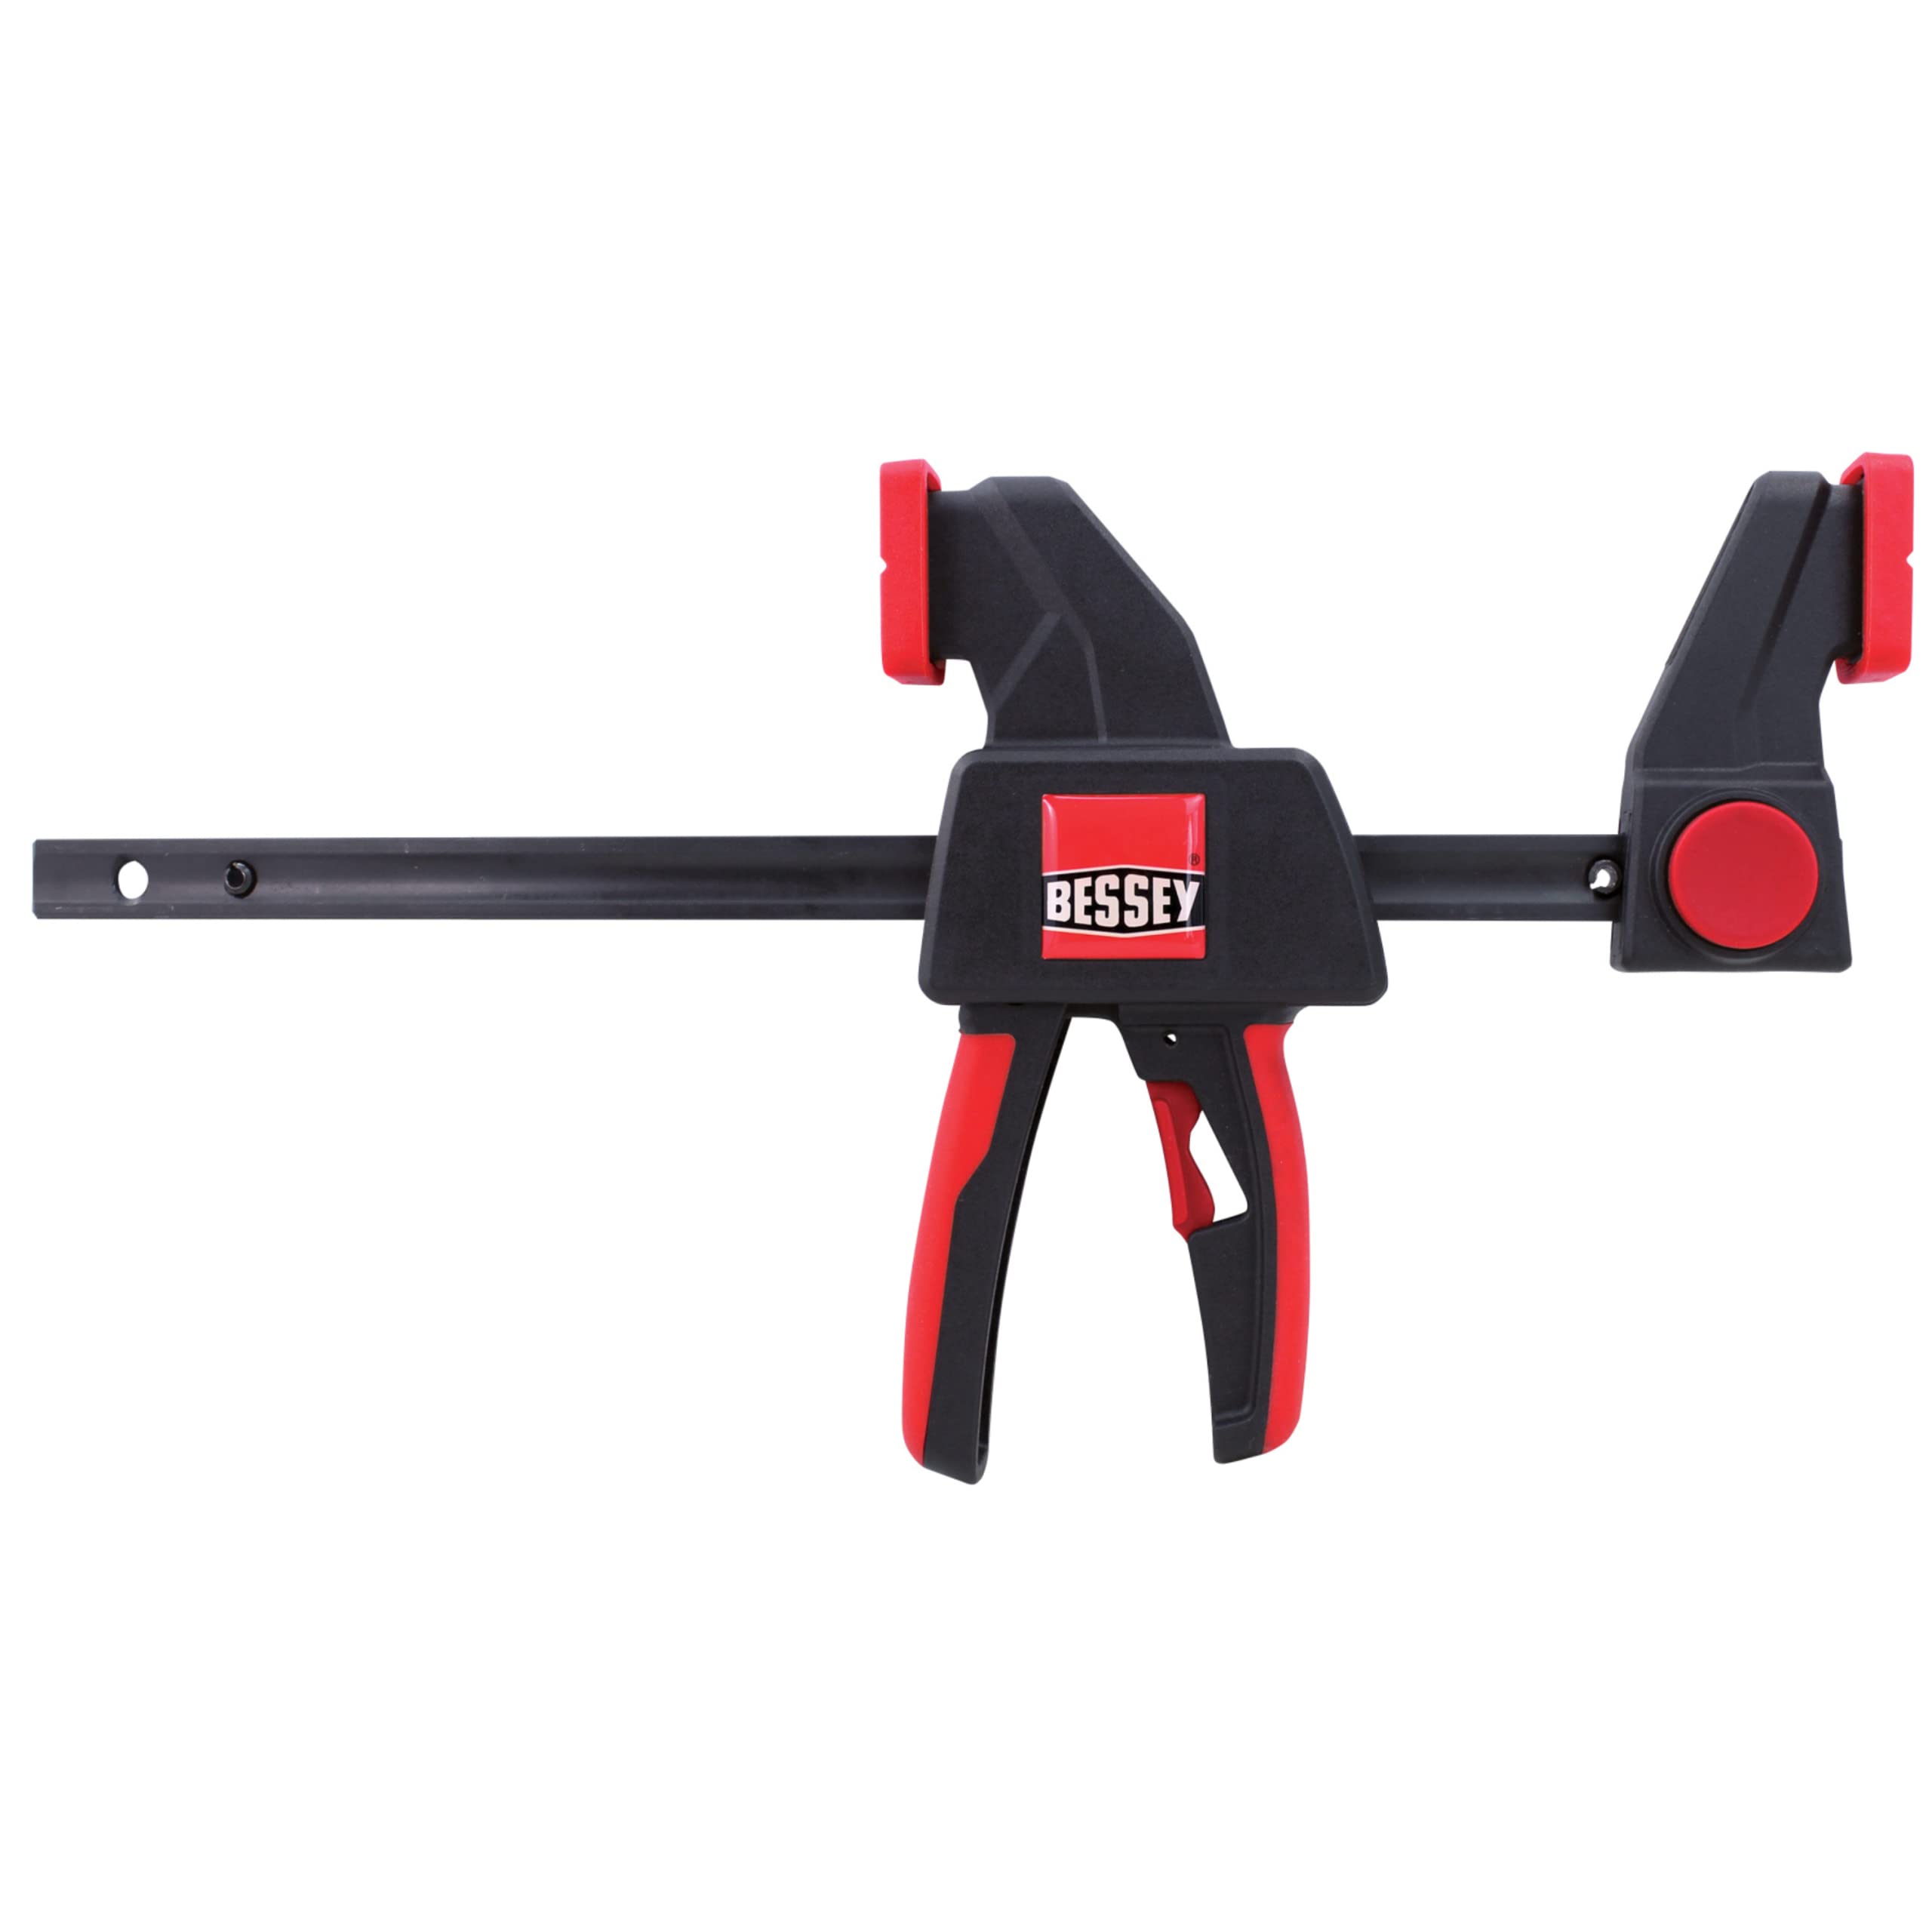 BESSEY EHK SERIES - 100 lb Clamping Force - 06 in - EHKM06 Trigger Clamp Set - 2.375 in. Throat Depth - Wood Clamps, Tools, & Equipment for Woodworking, Carpentry, Home Improvement, DIY